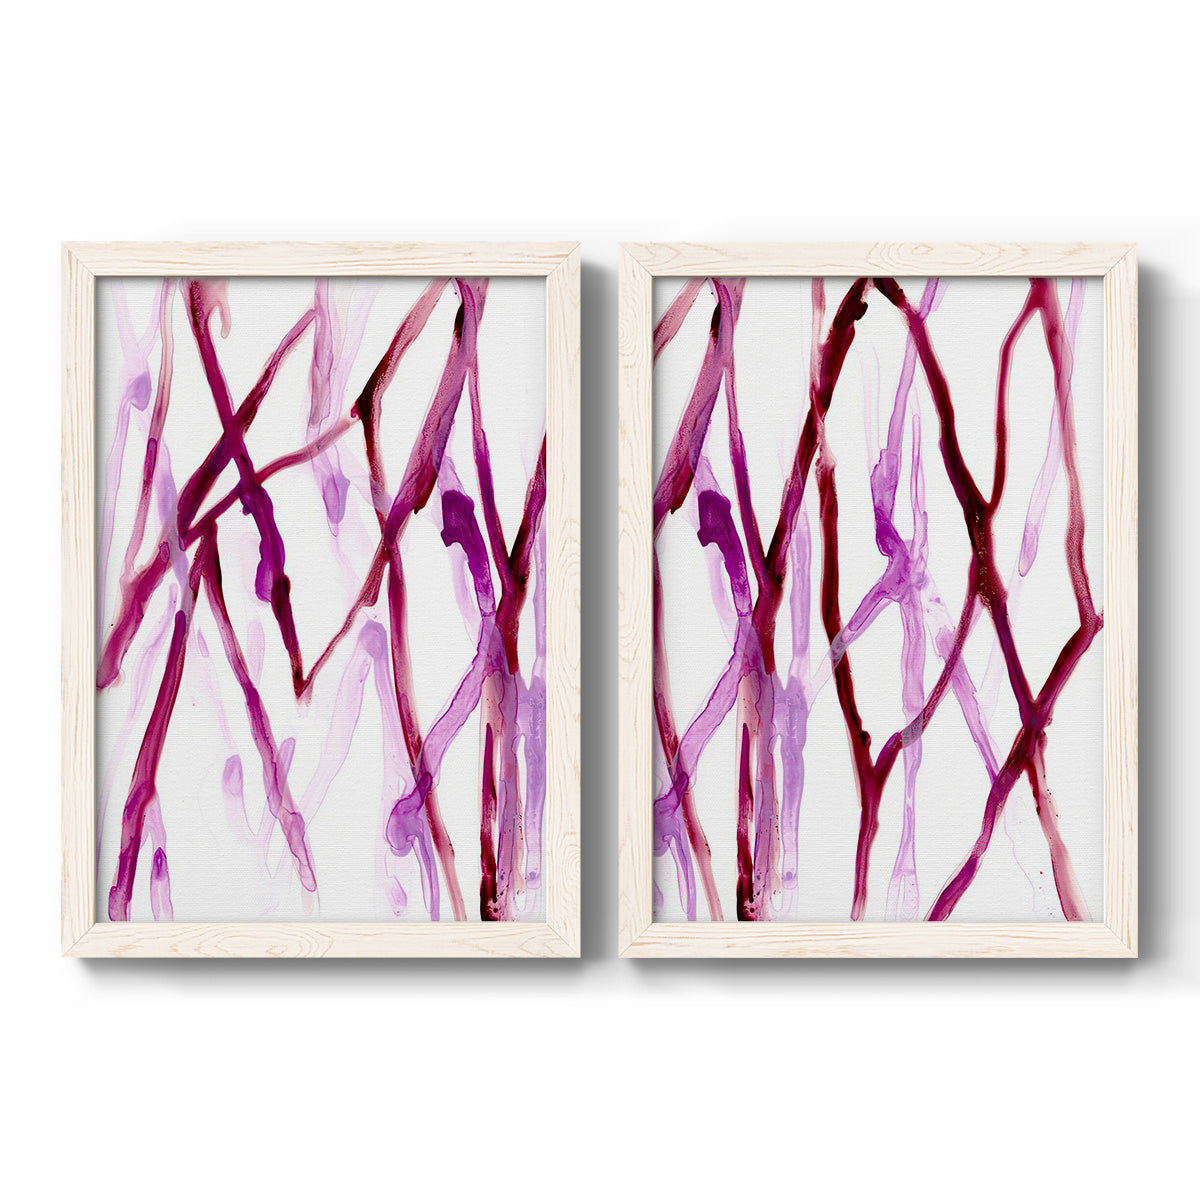 Runnel XV - Premium Framed Canvas 2 Piece Set - Ready to Hang